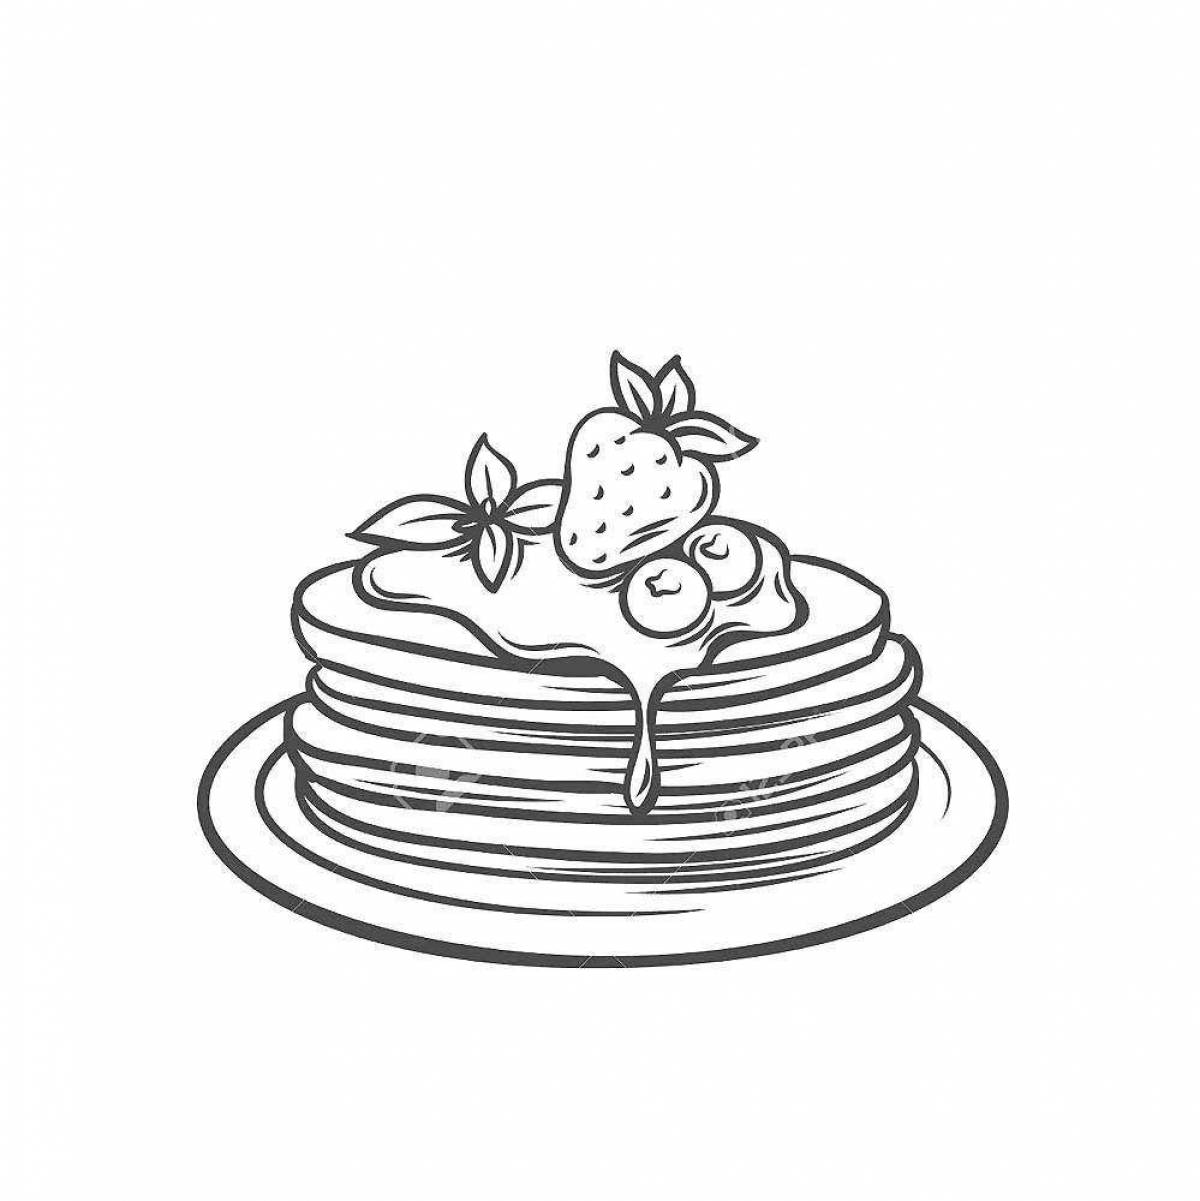 Live pancakes coloring book for kids